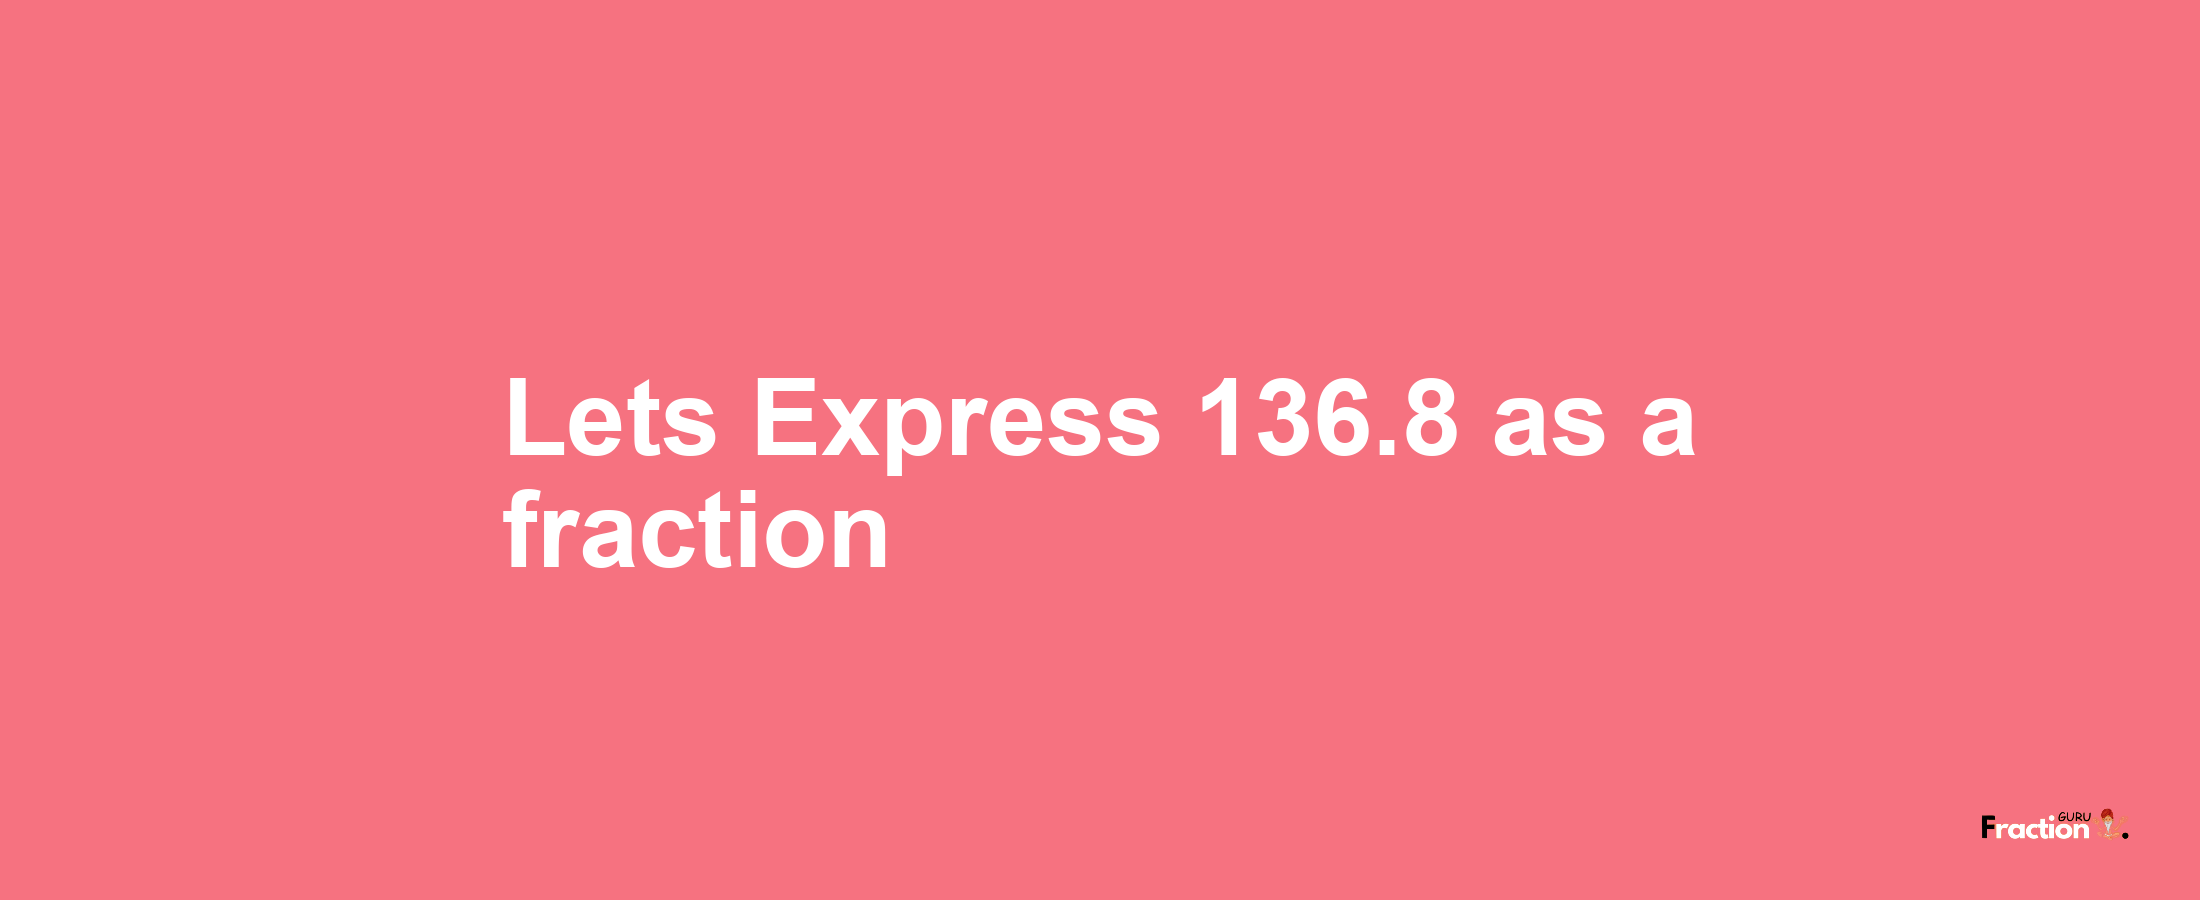 Lets Express 136.8 as afraction